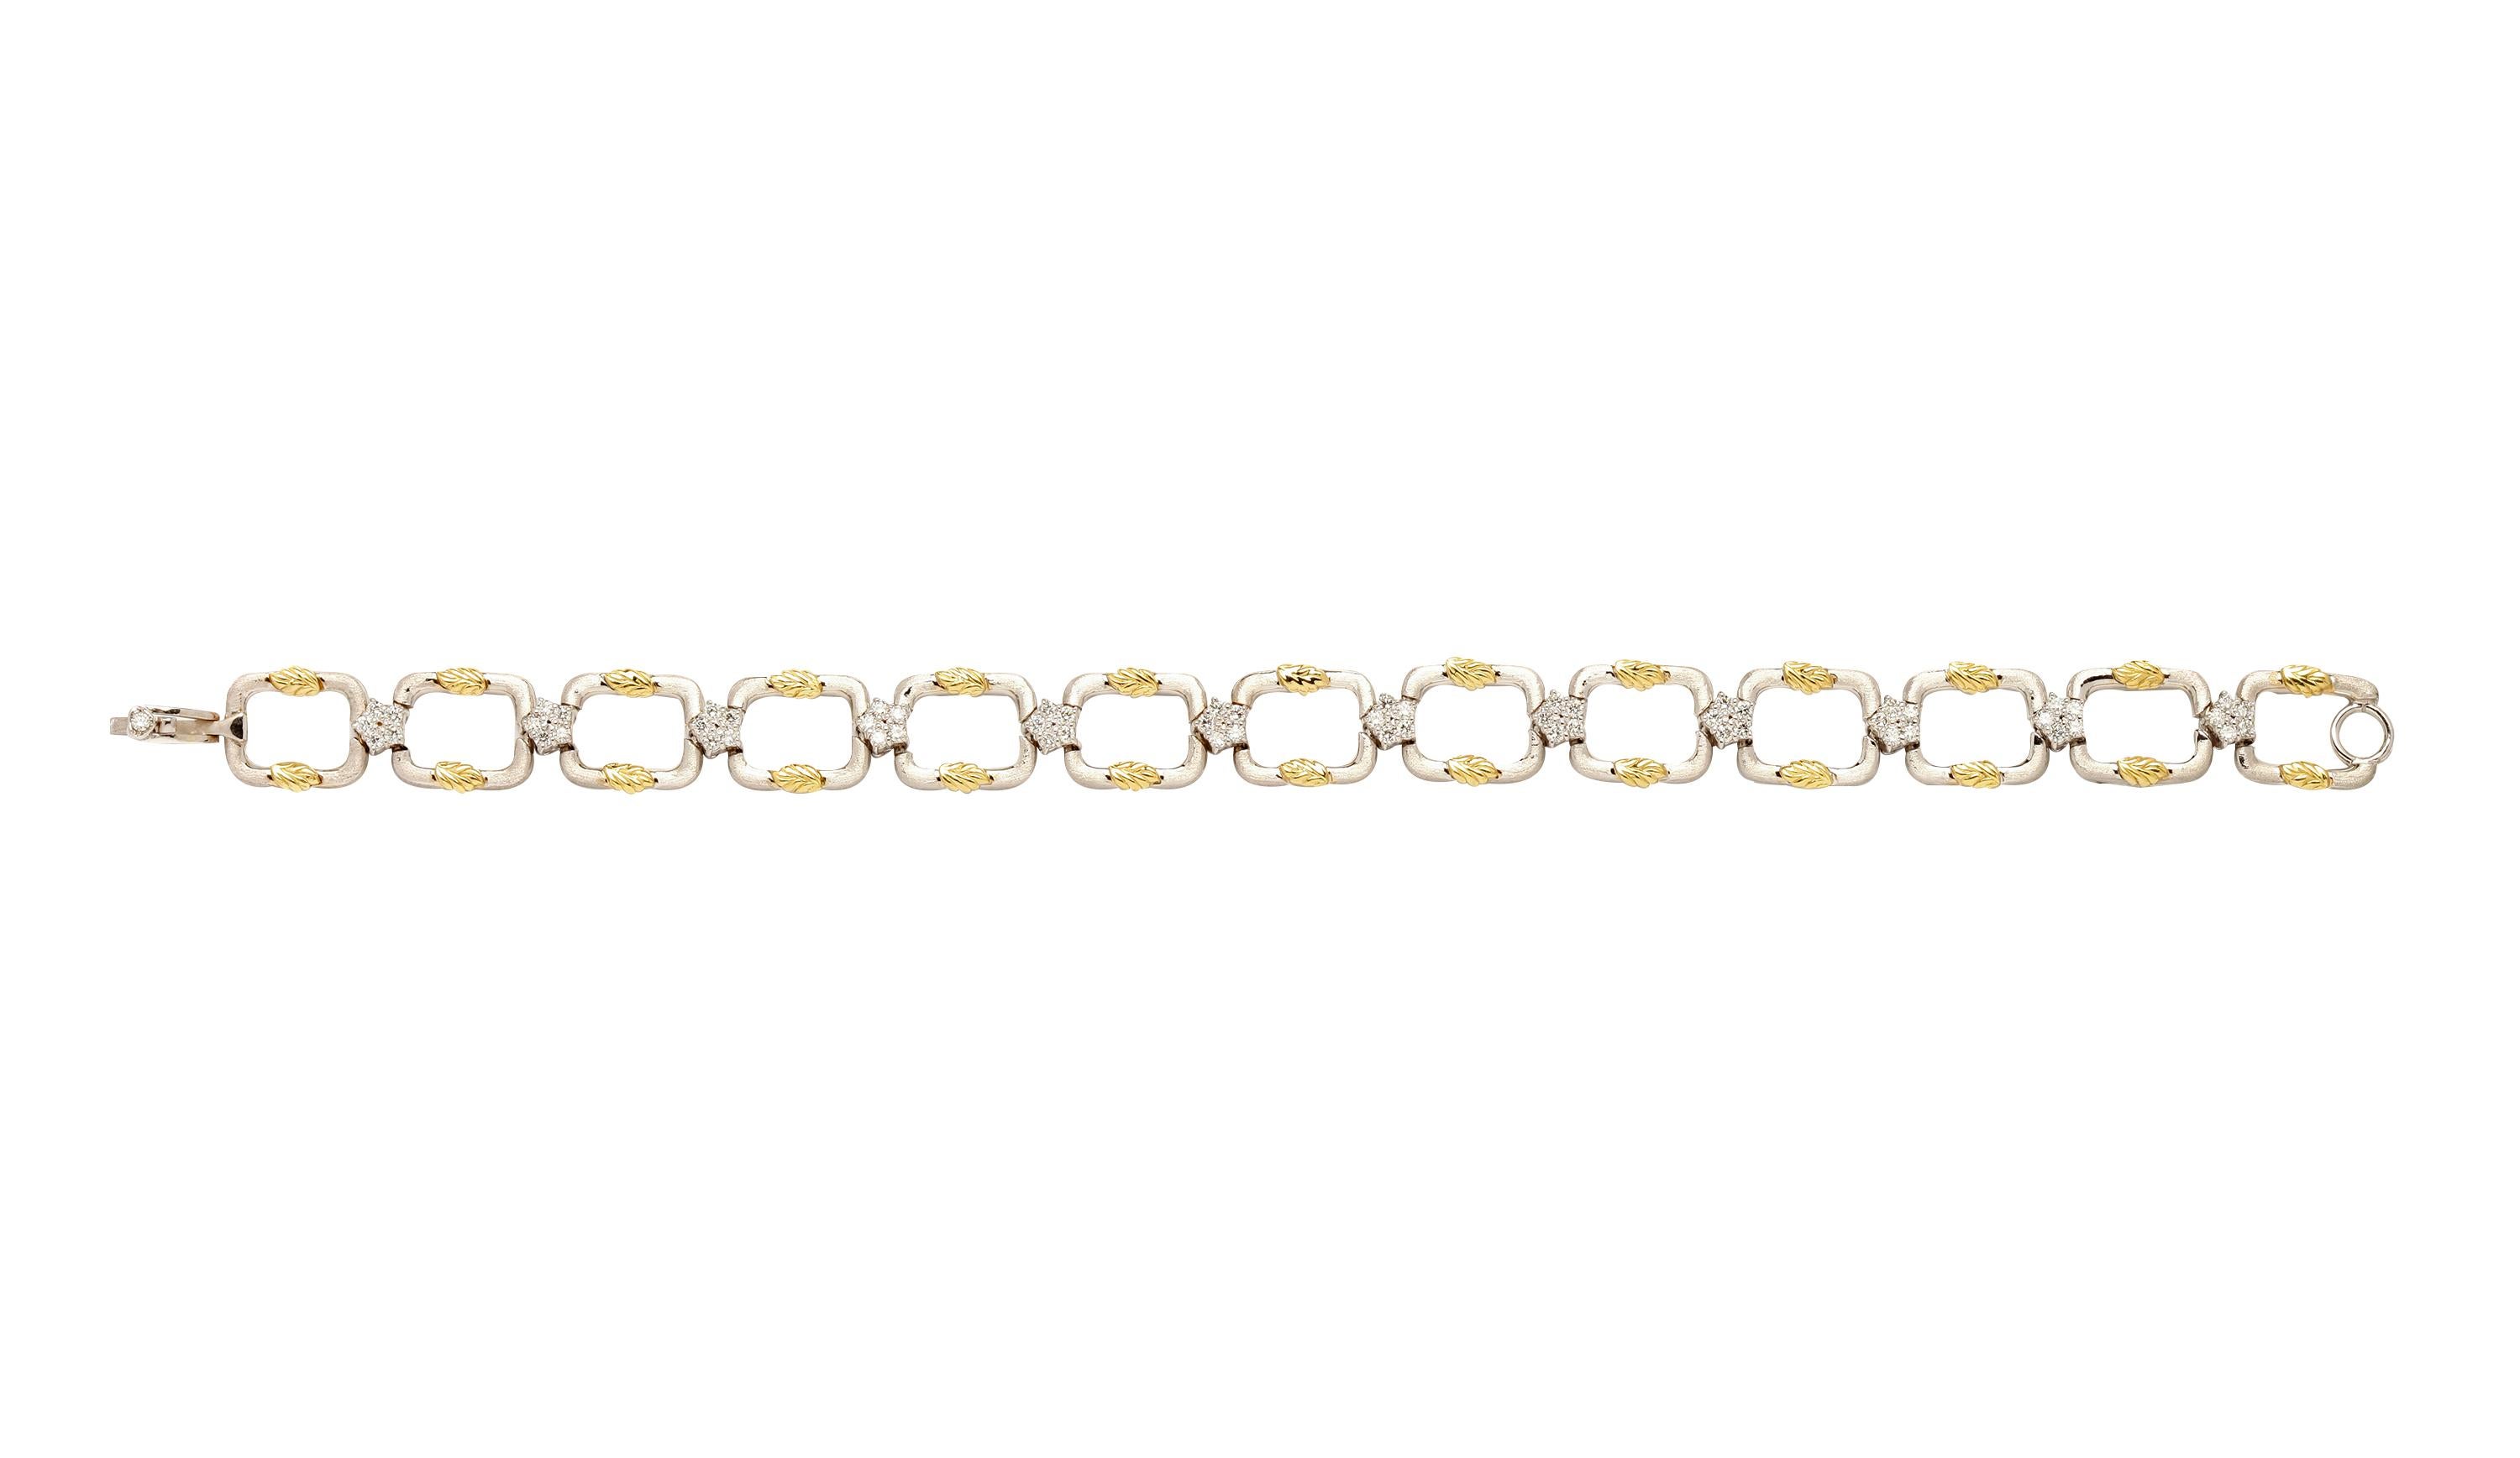 Stambolian 18K Yellow and White Two-Tone Gold Flower Link Bracelet with White Diamonds

White Diamond Flowers Between each Link and Yellow gold Leaf detailing. 

0.92 carat G color, VS clarity diamonds

Bracelet has a very secure clasp with safety